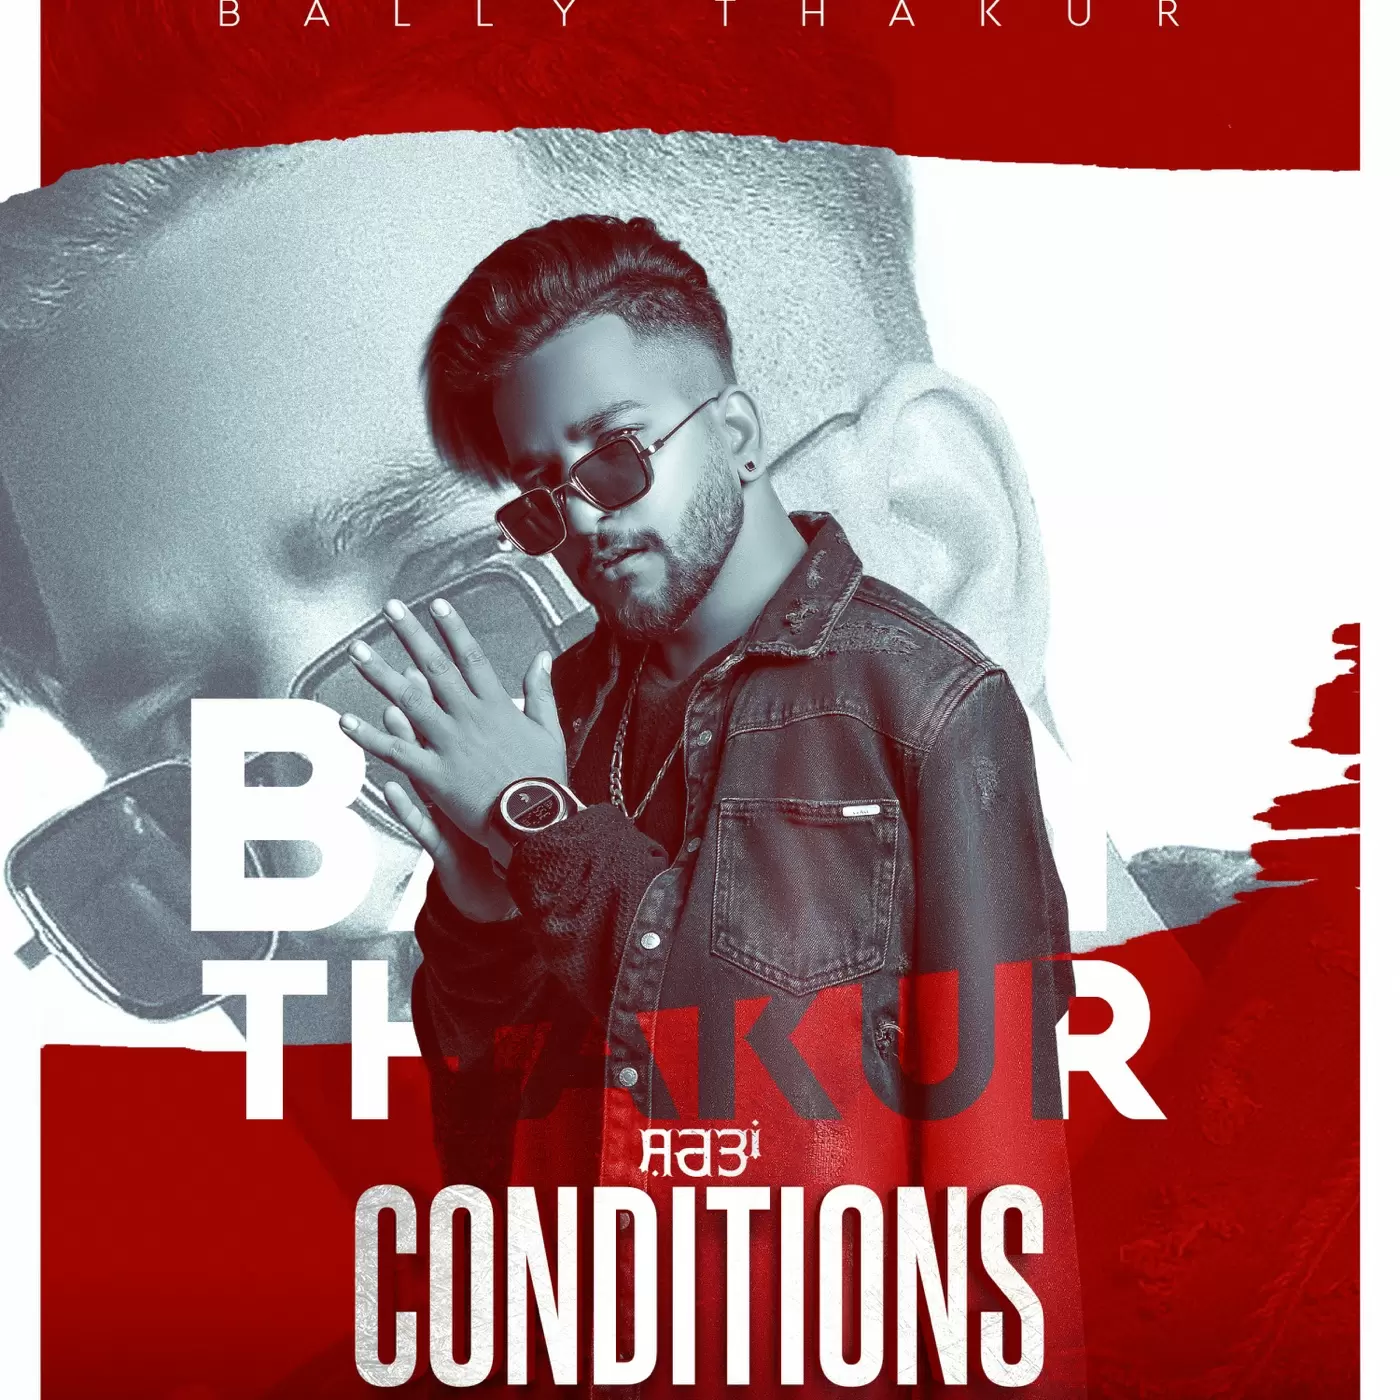 Conditions Bally Thakur Mp3 Download Song - Mr-Punjab